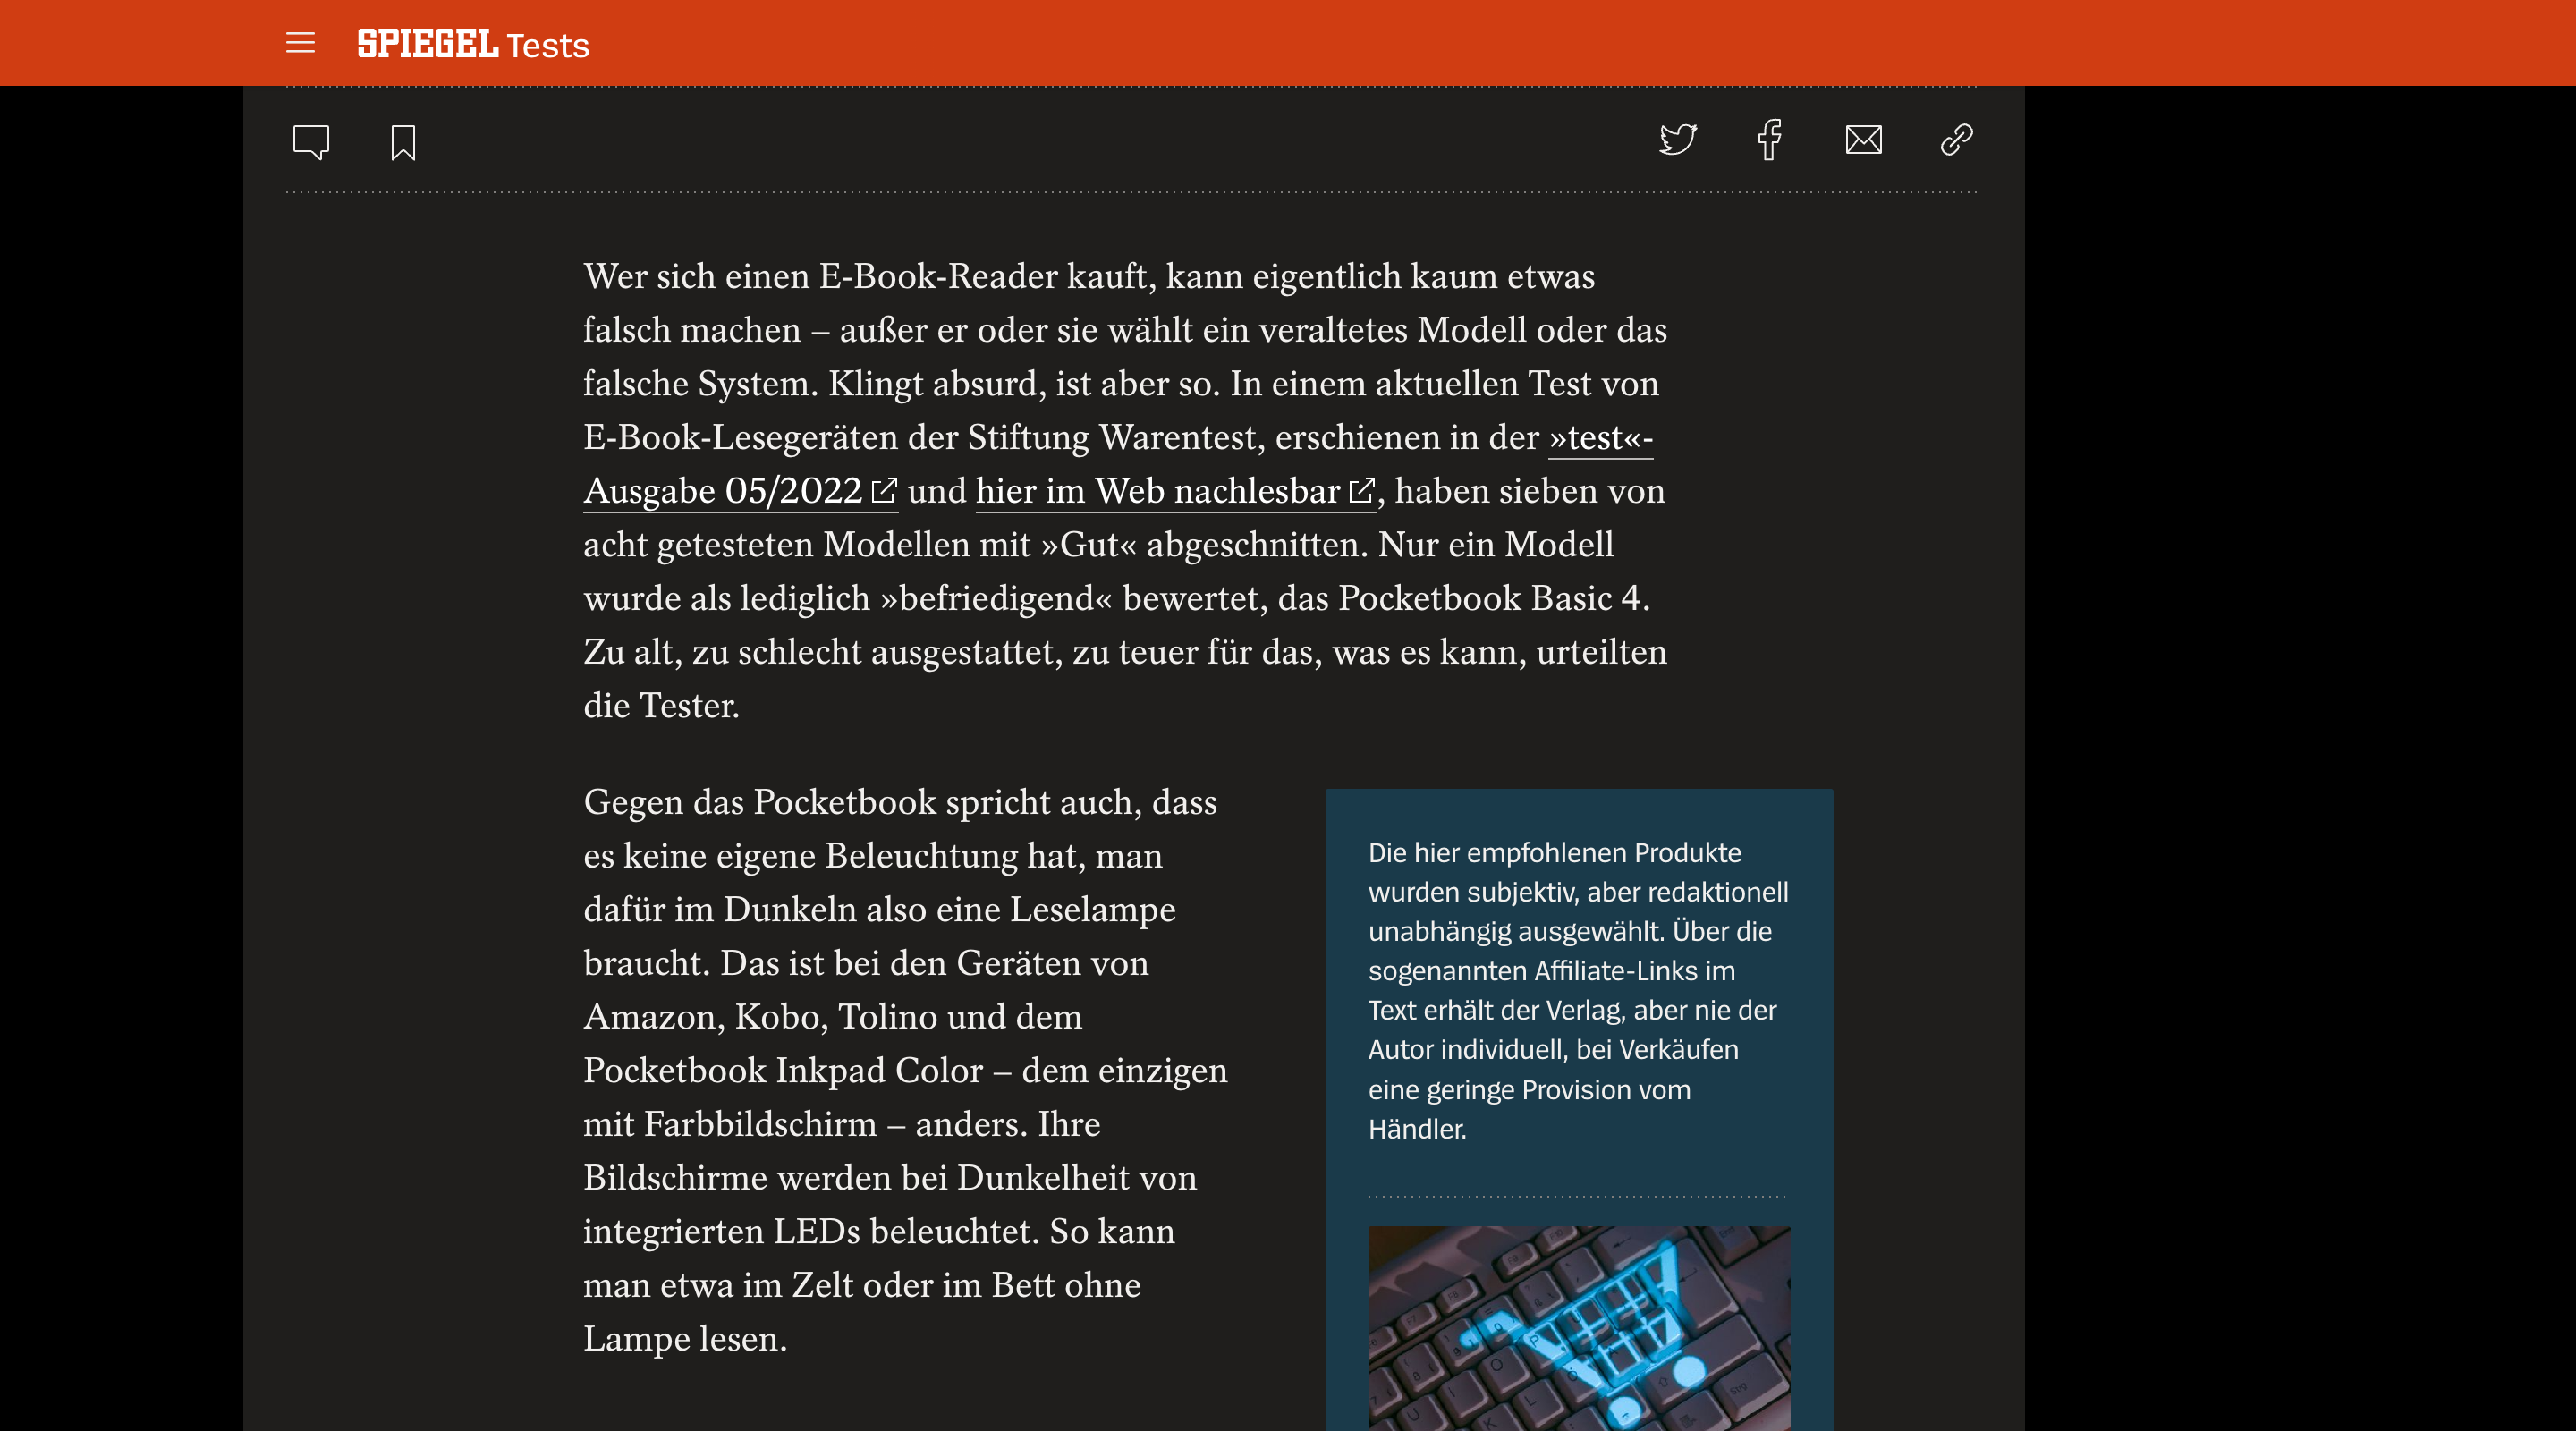 Screenshot of an article on the Der Spiegel website. The header contains a menu button and the Spiegel logo. Above the article text is a row of icons for sharing or bookmarking the article.